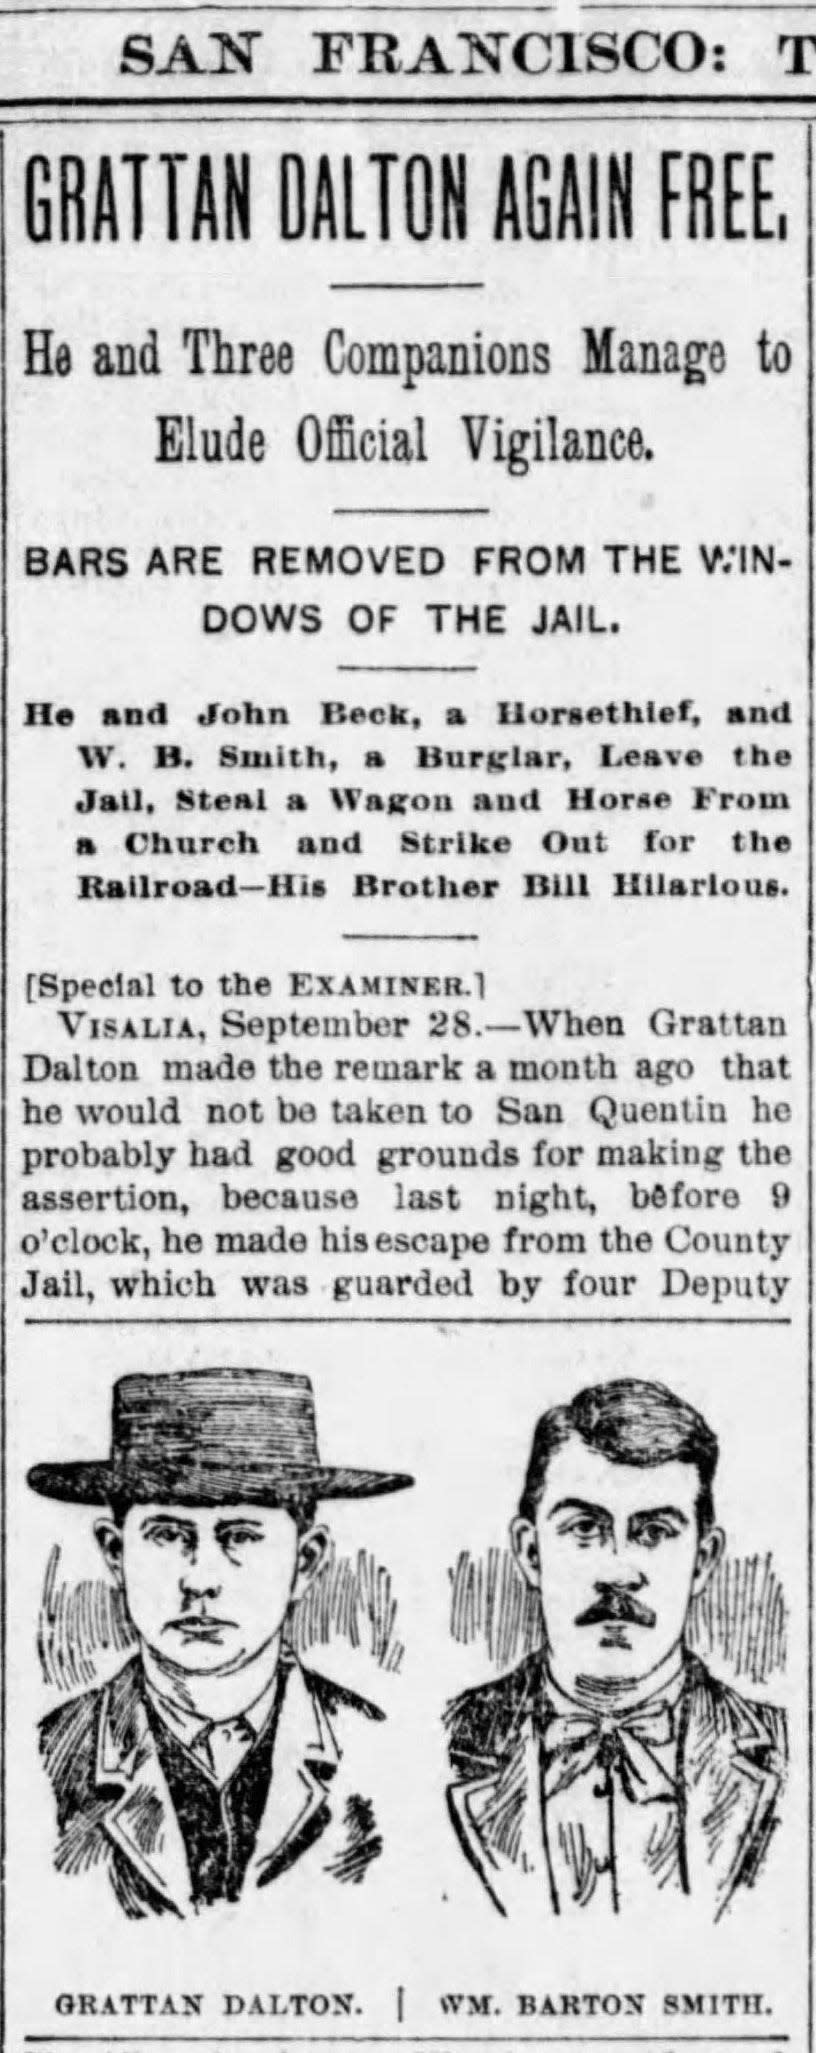 William Randolph Hearst's San Francisco Examiner, article about Grat Dalton's escape from the Tulare County Jail in Visalia on September 27, 1891.